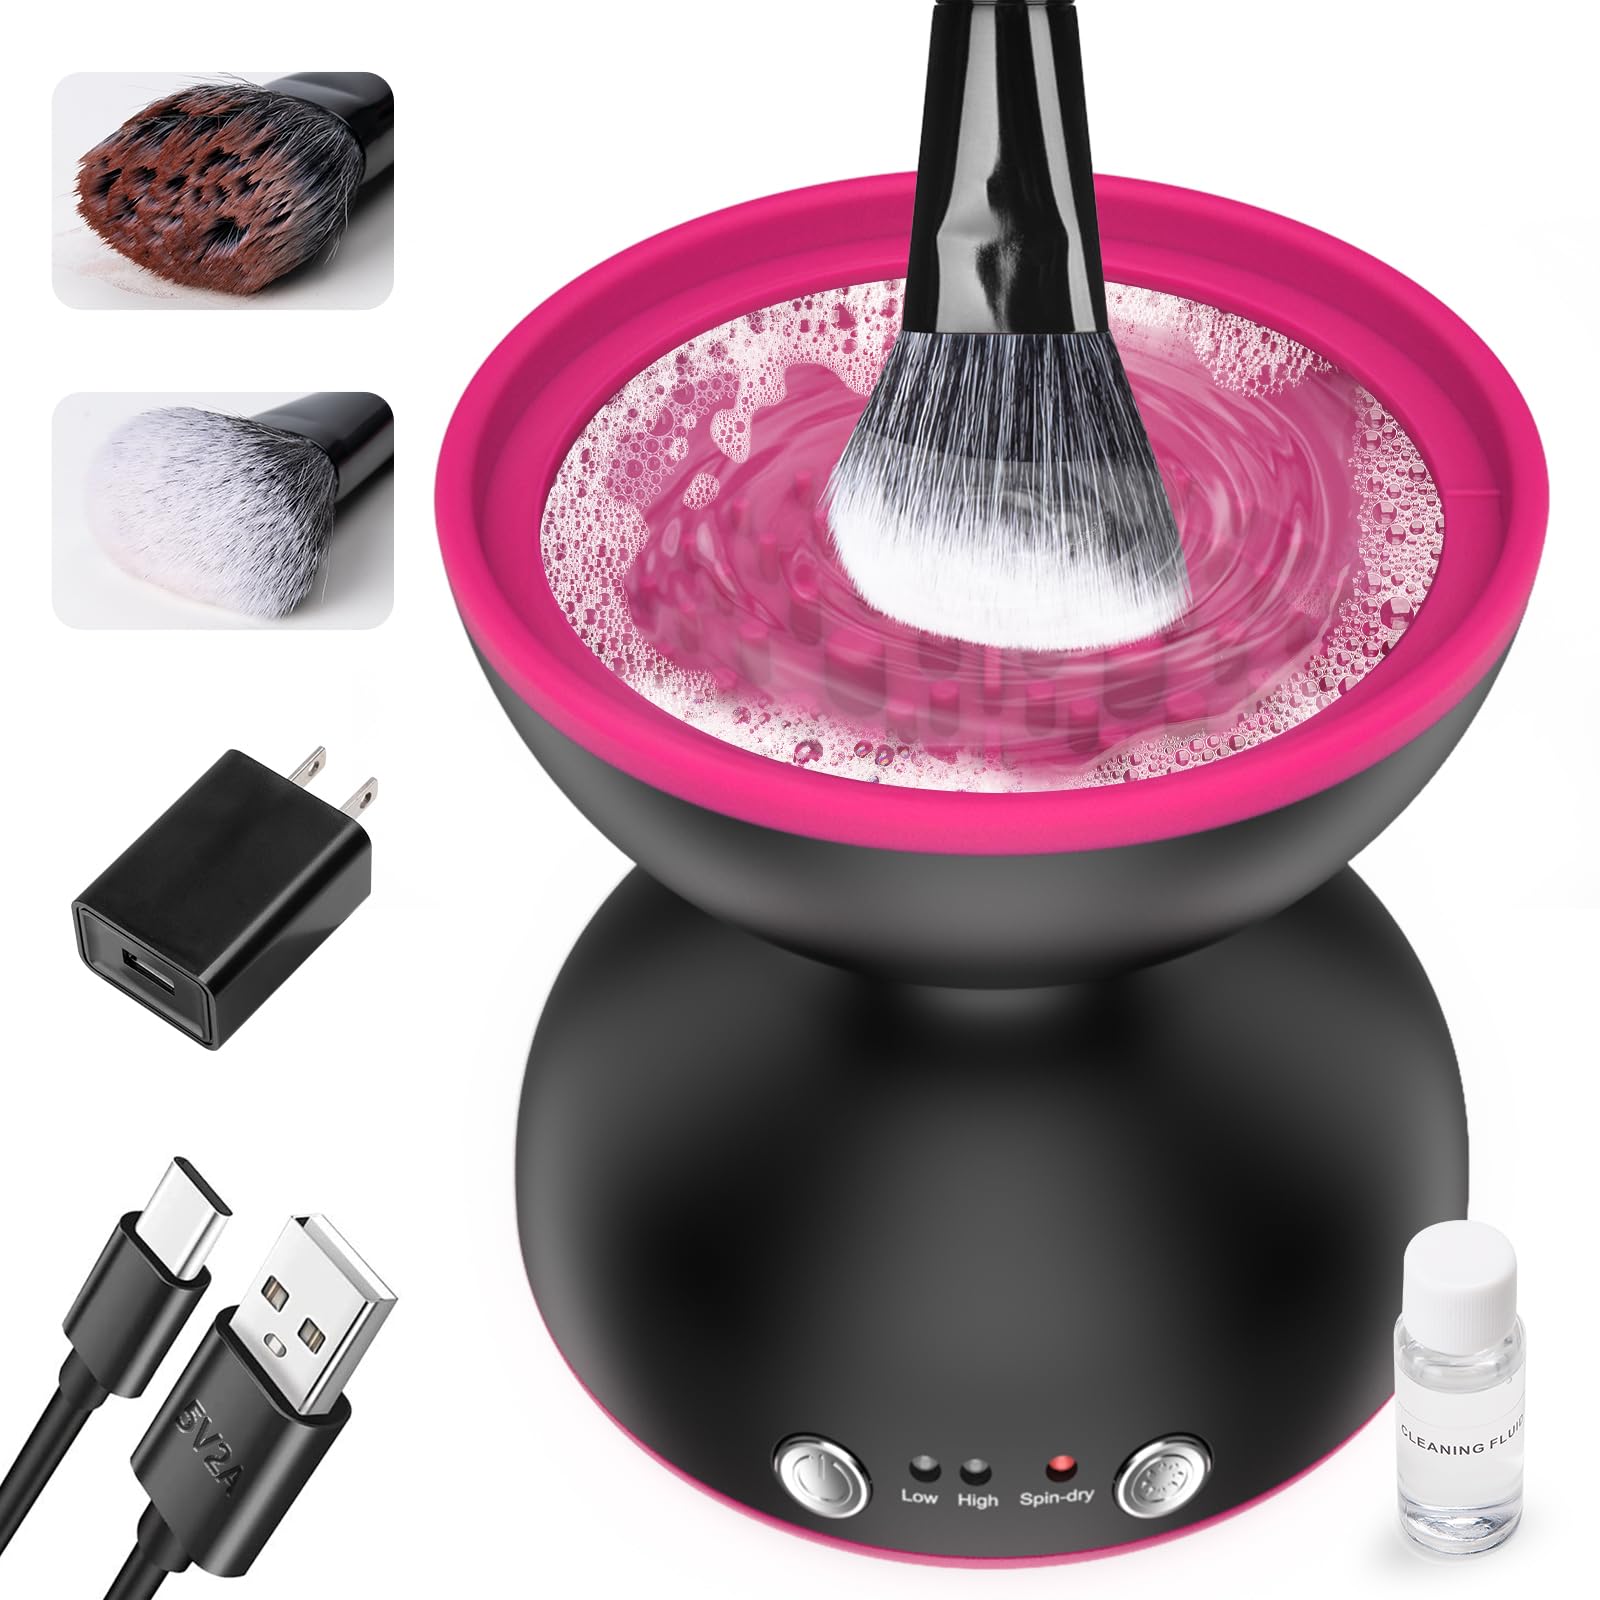 ATAWOL Makeup Brush cleaner Machine, Two gears Speed and Dehydration Function,Travel Portable Automatic Use 5V2A adapter or Powe